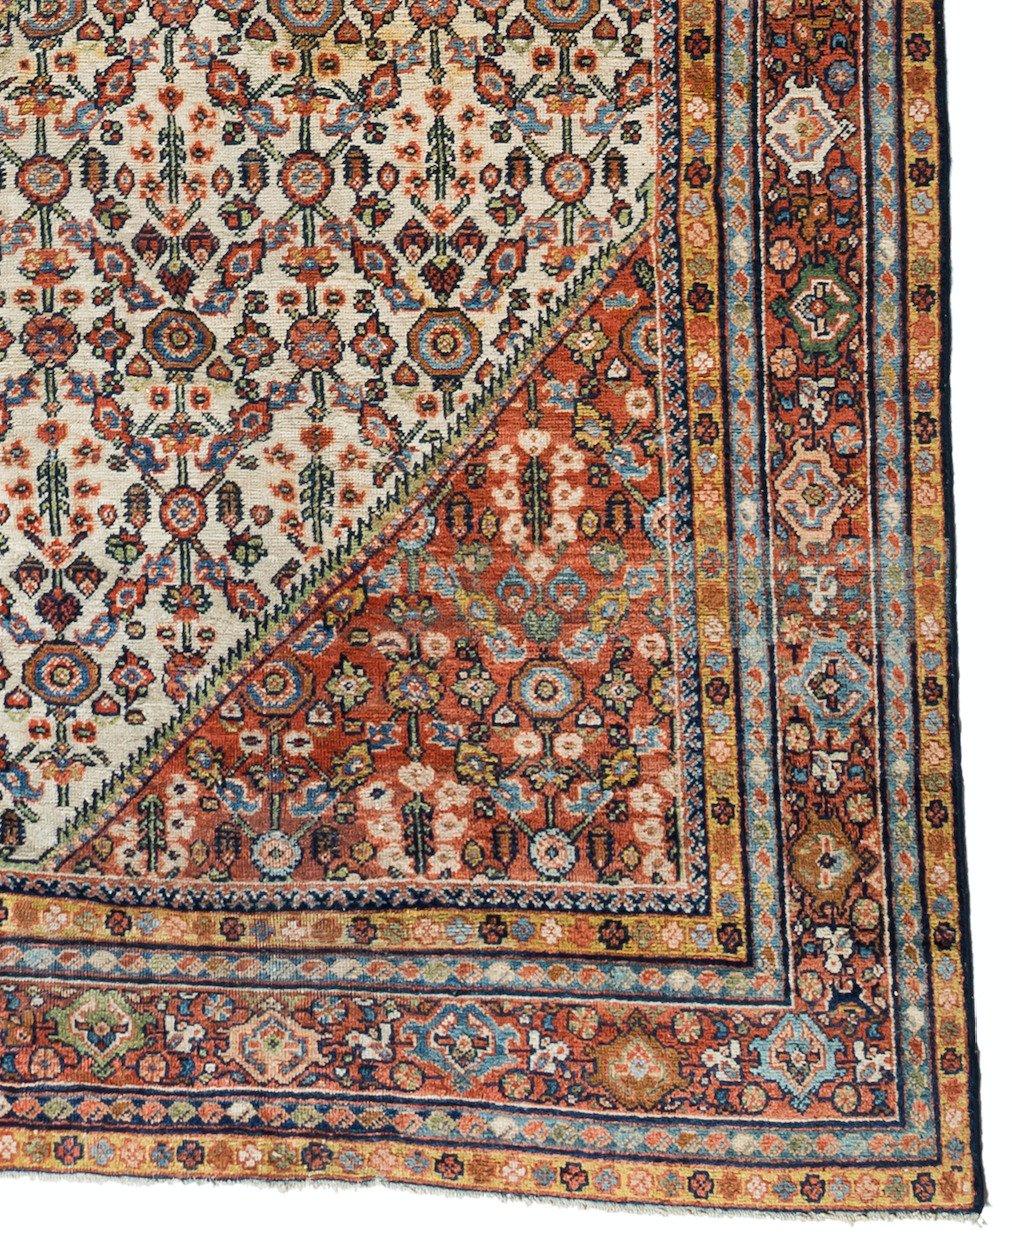 Hand-Knotted Vintage Persian Ivory Beige Rust Mahal Ziegler Rug, circa 1900s-1920s For Sale